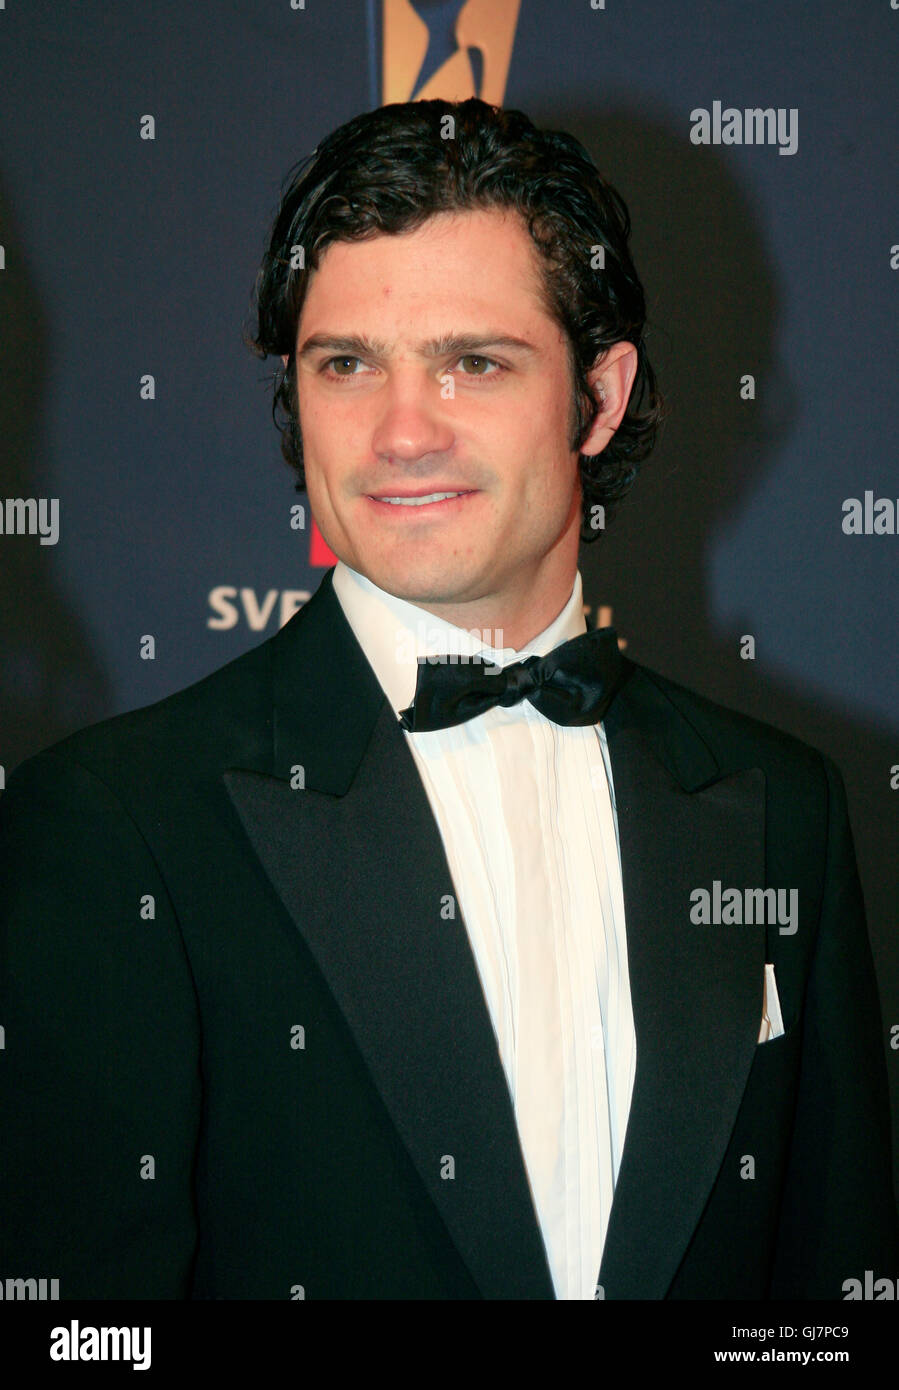 PRINCE CARL PHILIP at the annual sports gala 2010 Stock Photo